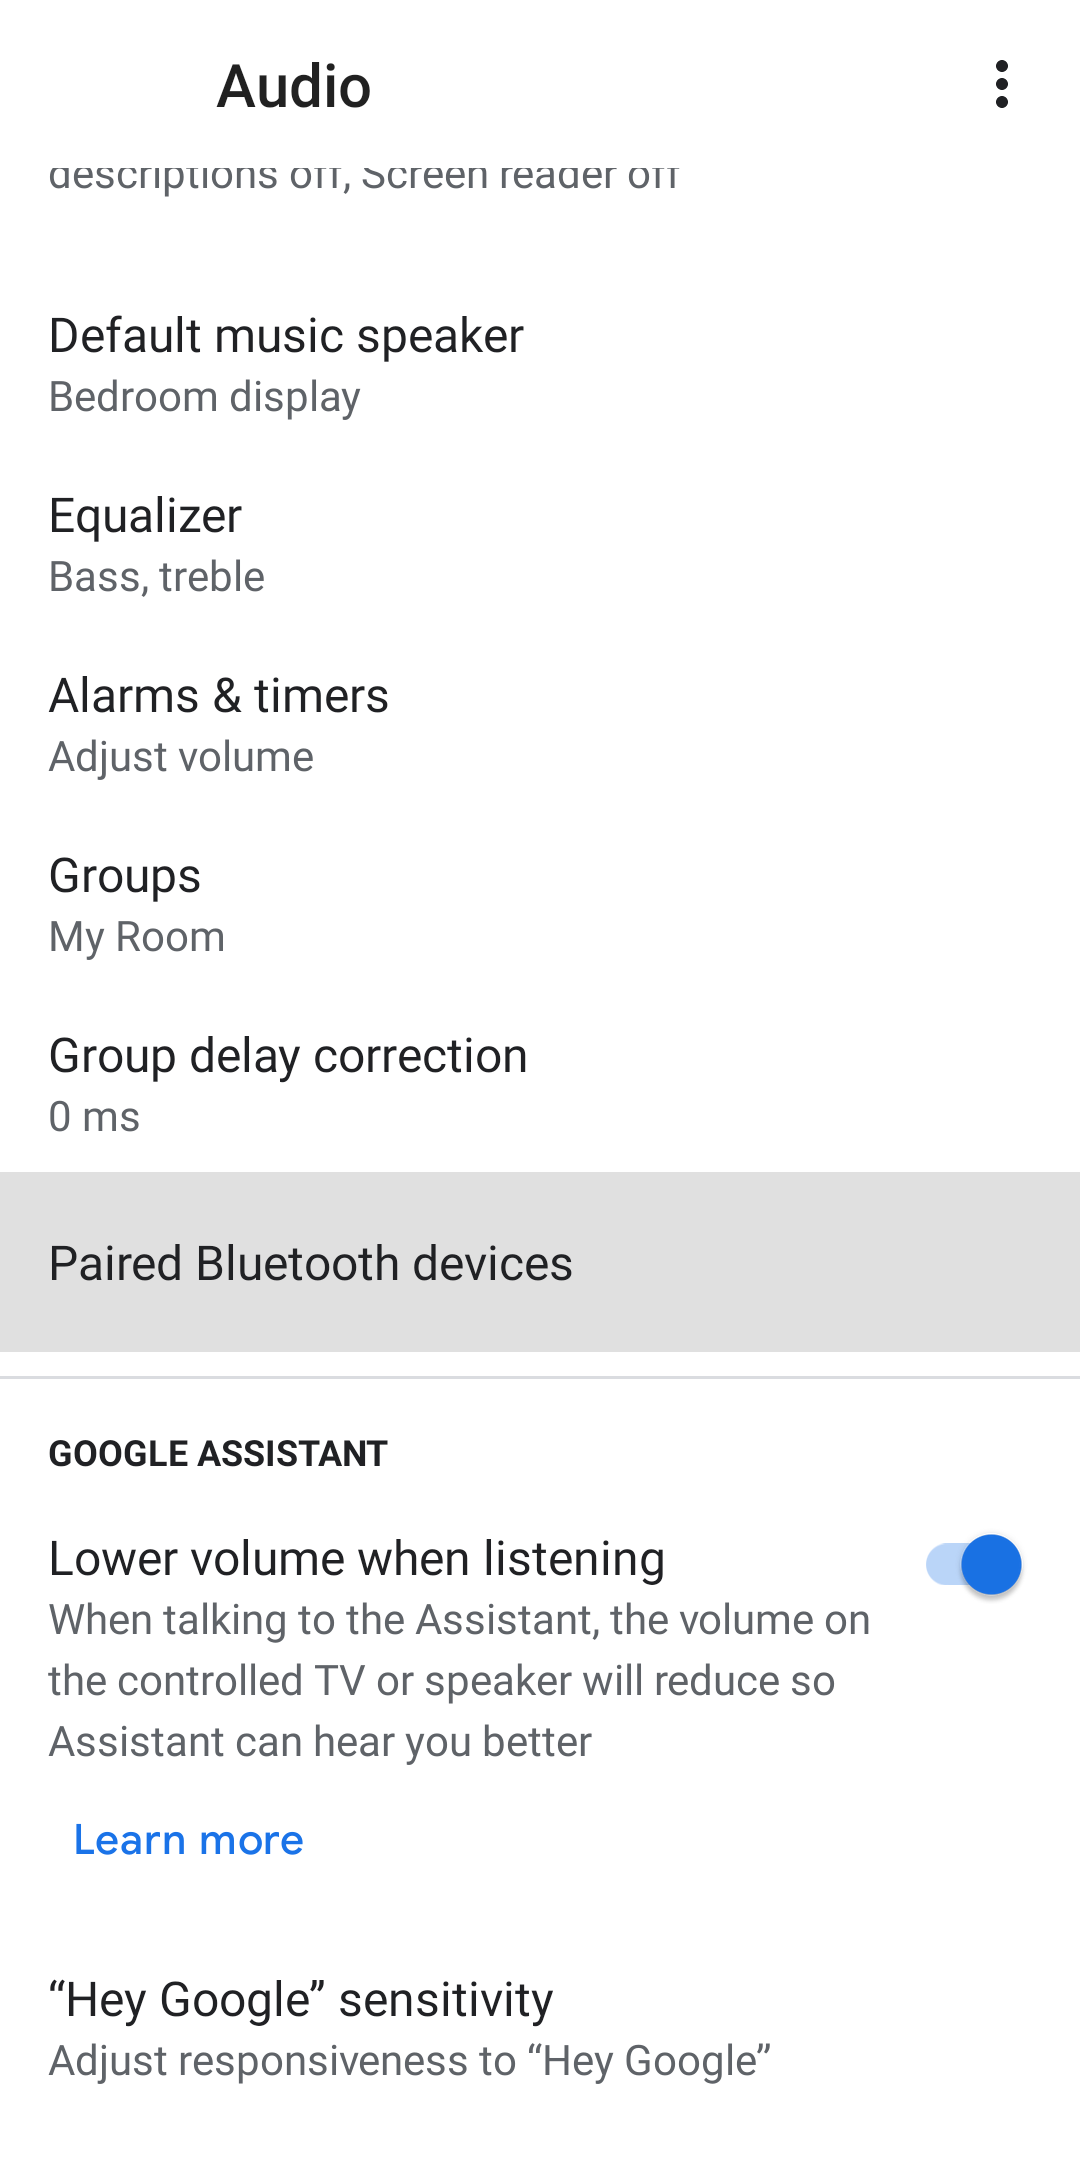 Screenshot shows the Audio settings page in the Google Home app. 'Pair Bluetooth devices' is highlighted.